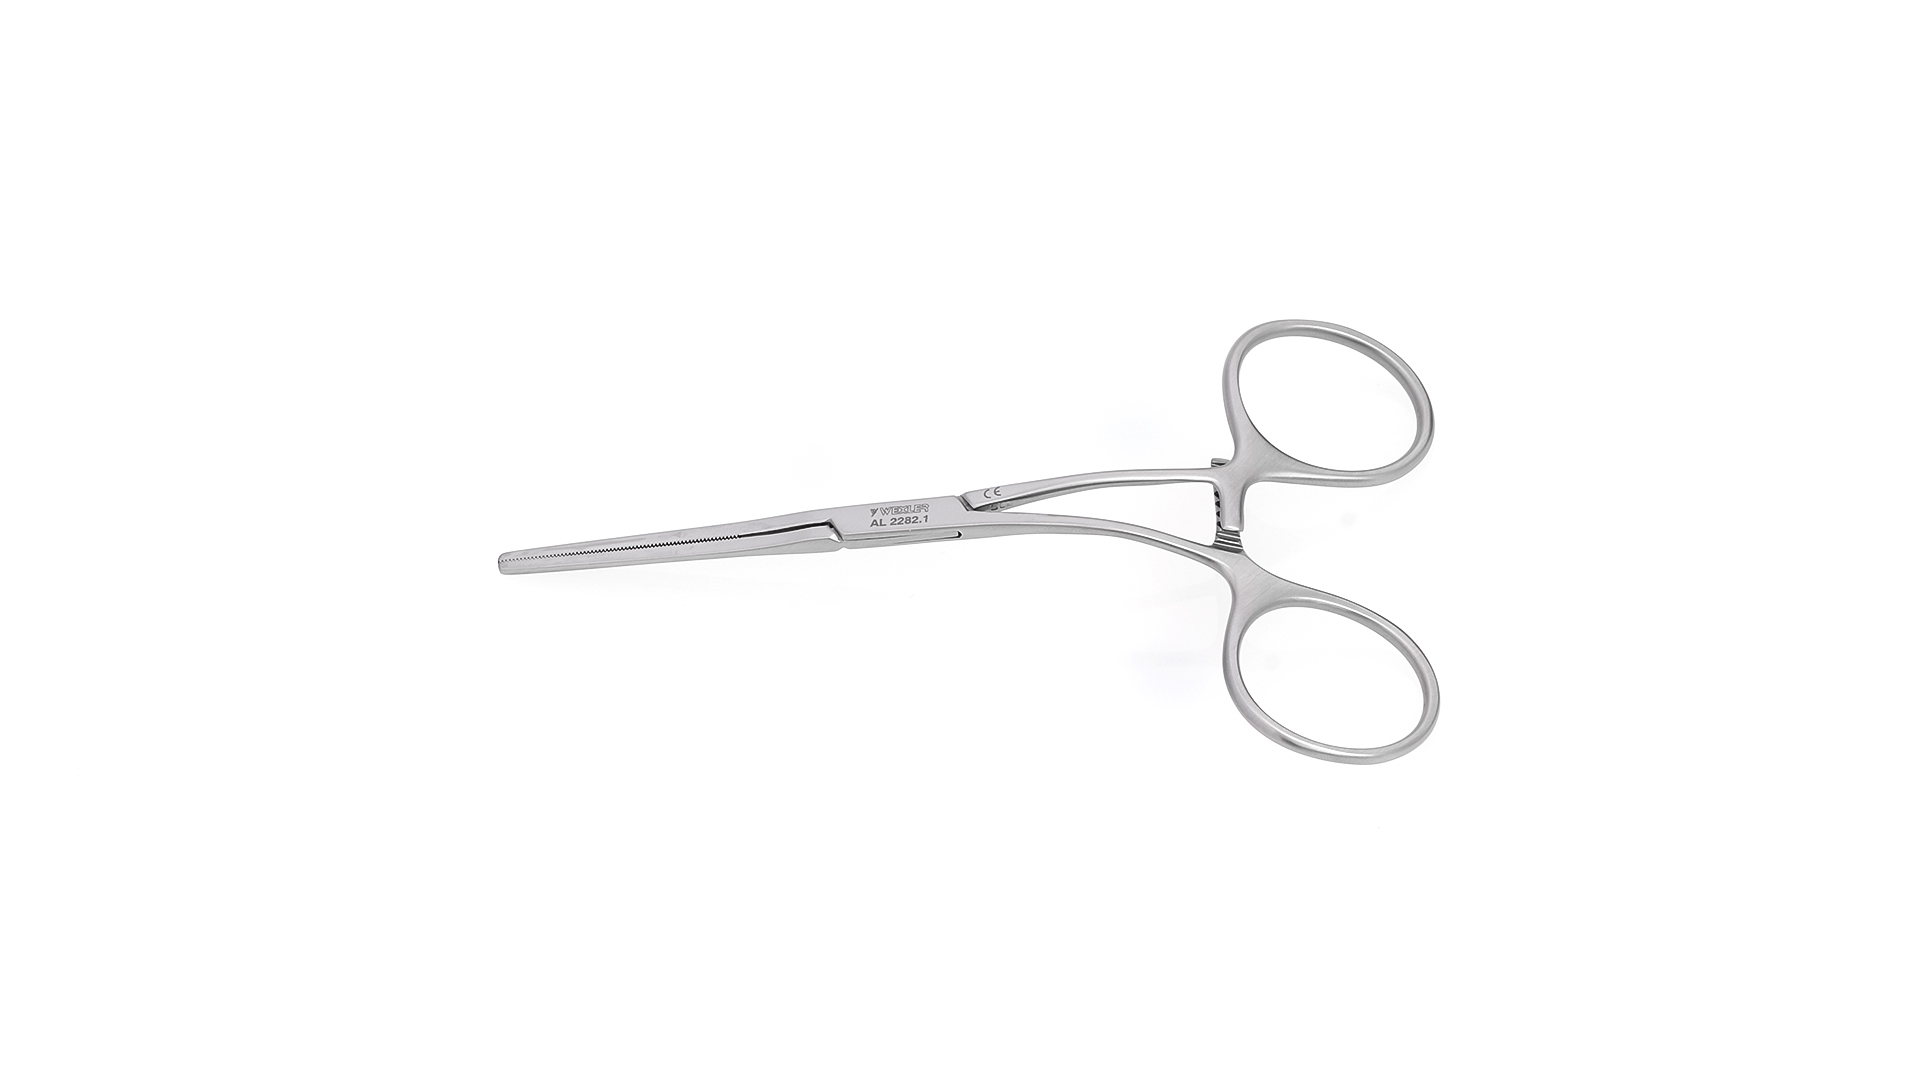 Cooley Neonatal Clamp - Straight Cooley Atraumatic jaws